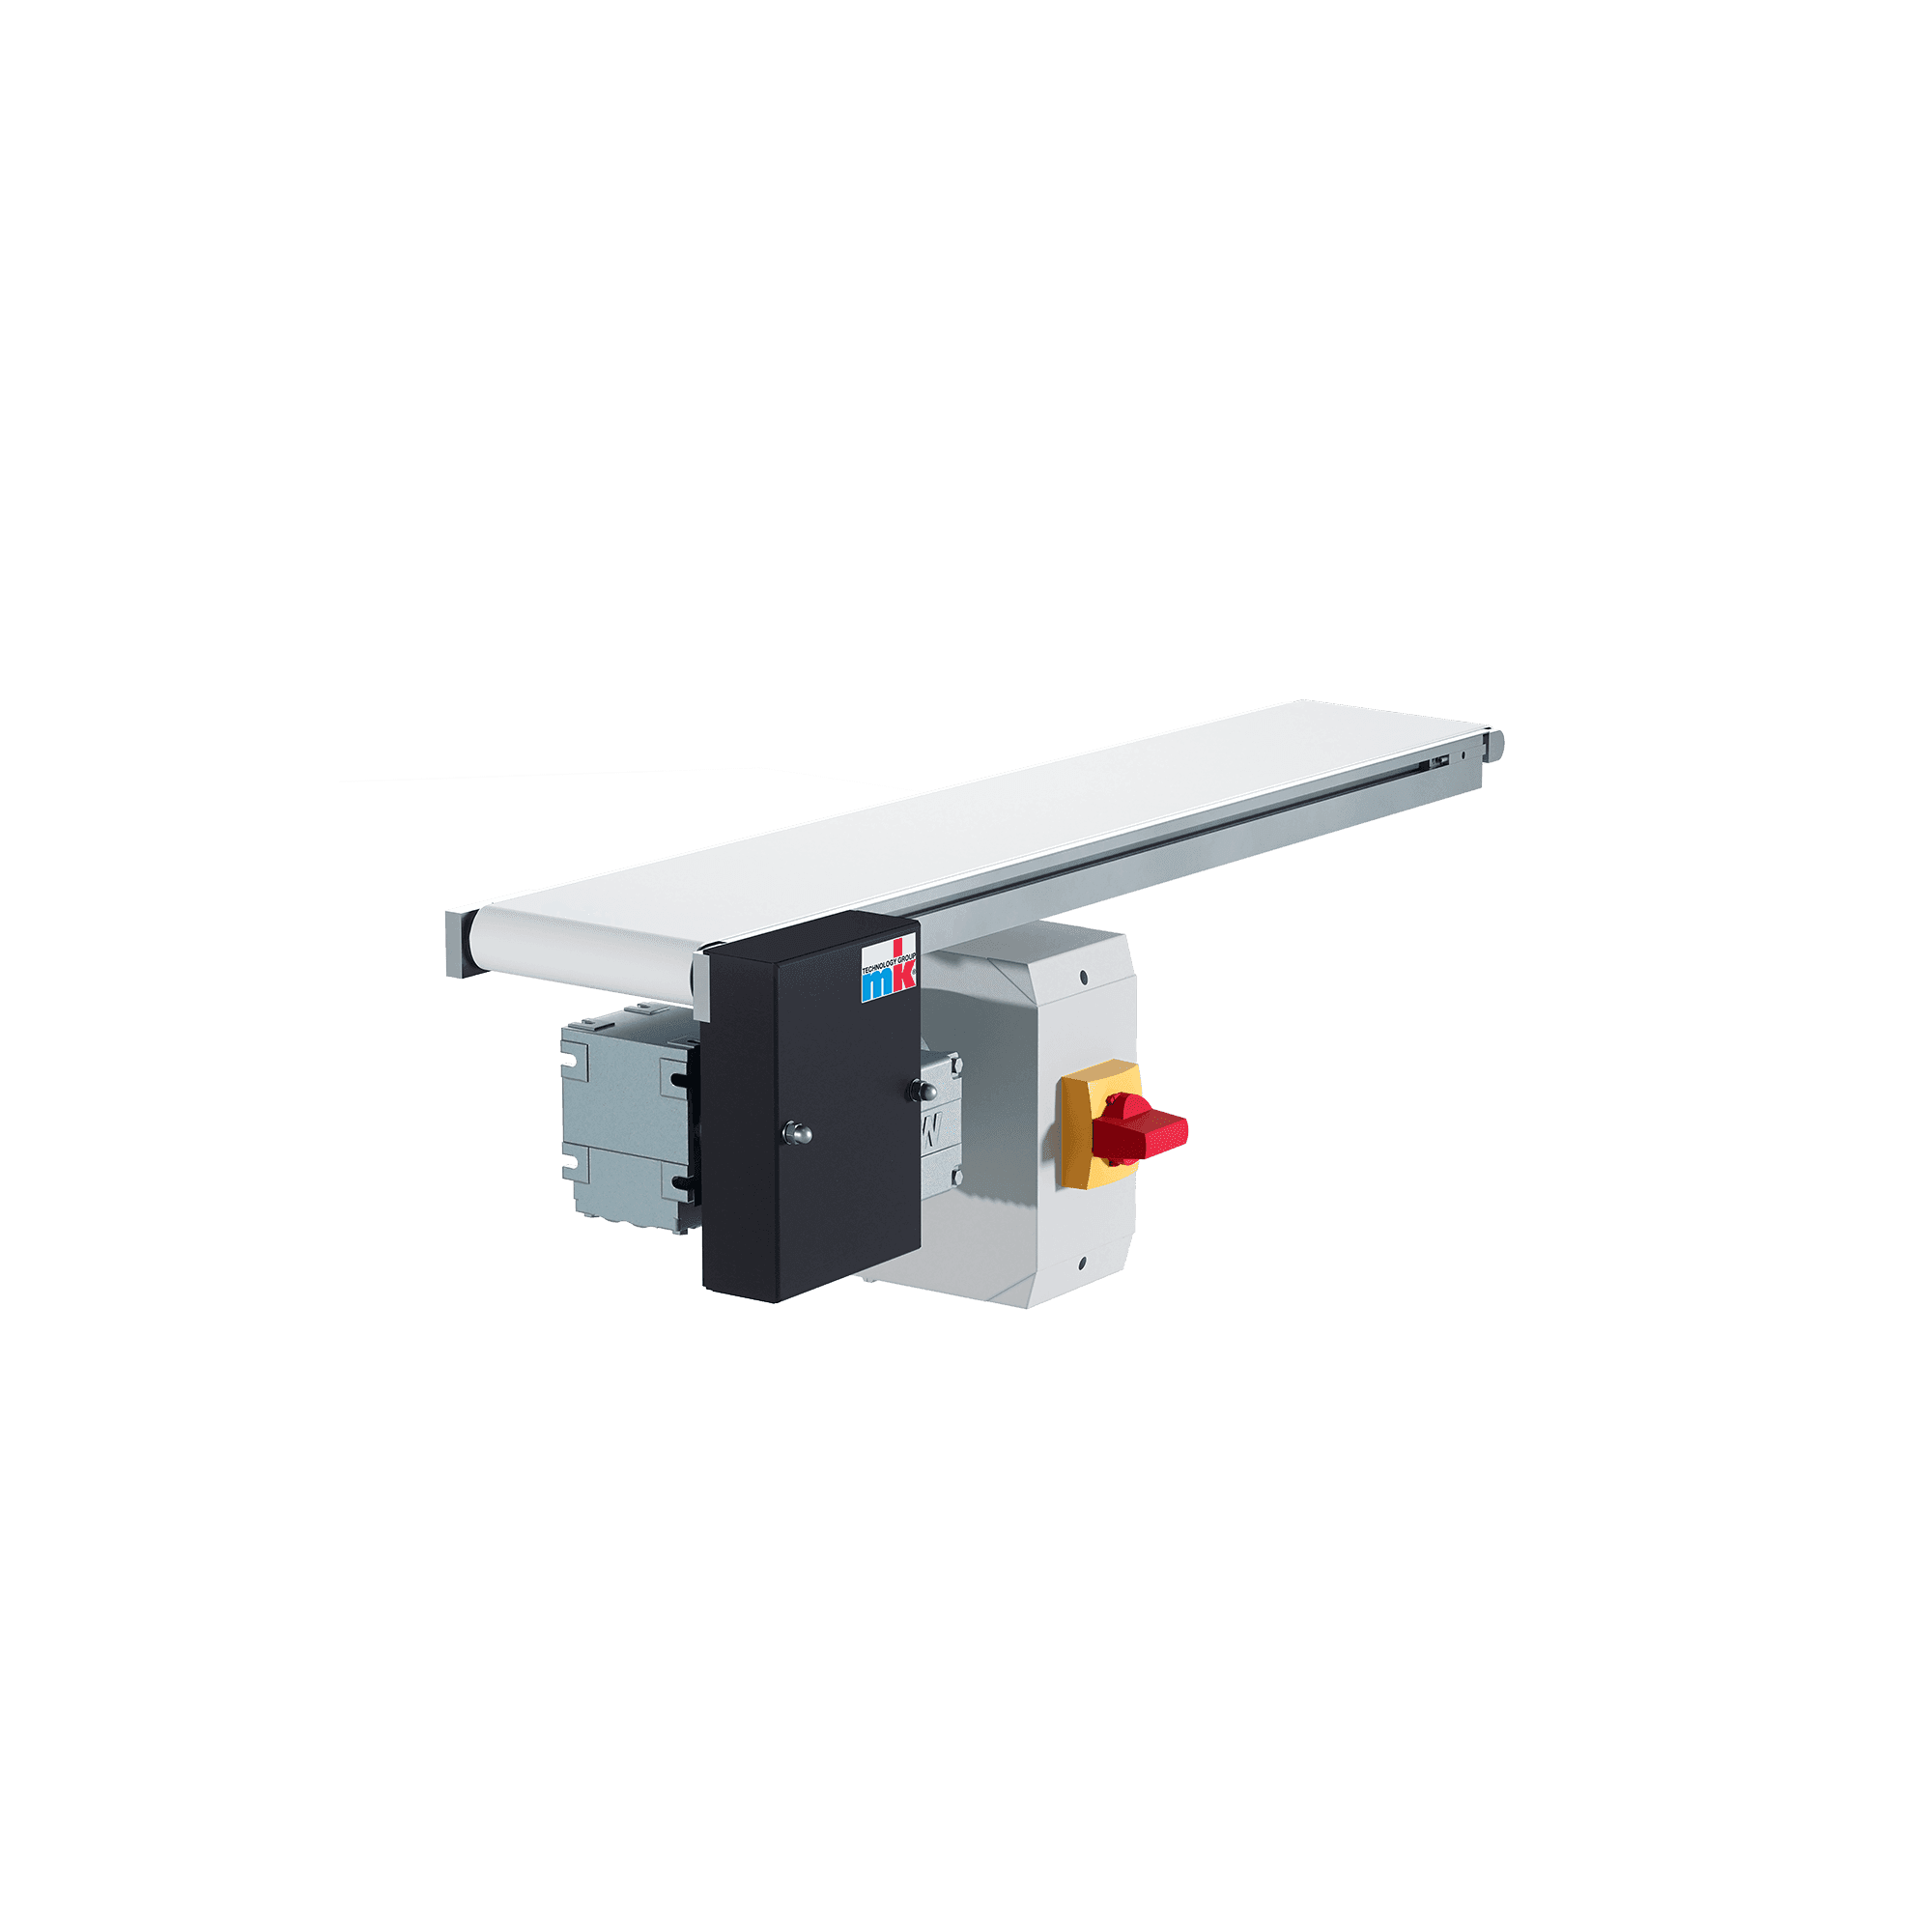 Small Conveyor GUF-P MINI for small and lightweight parts